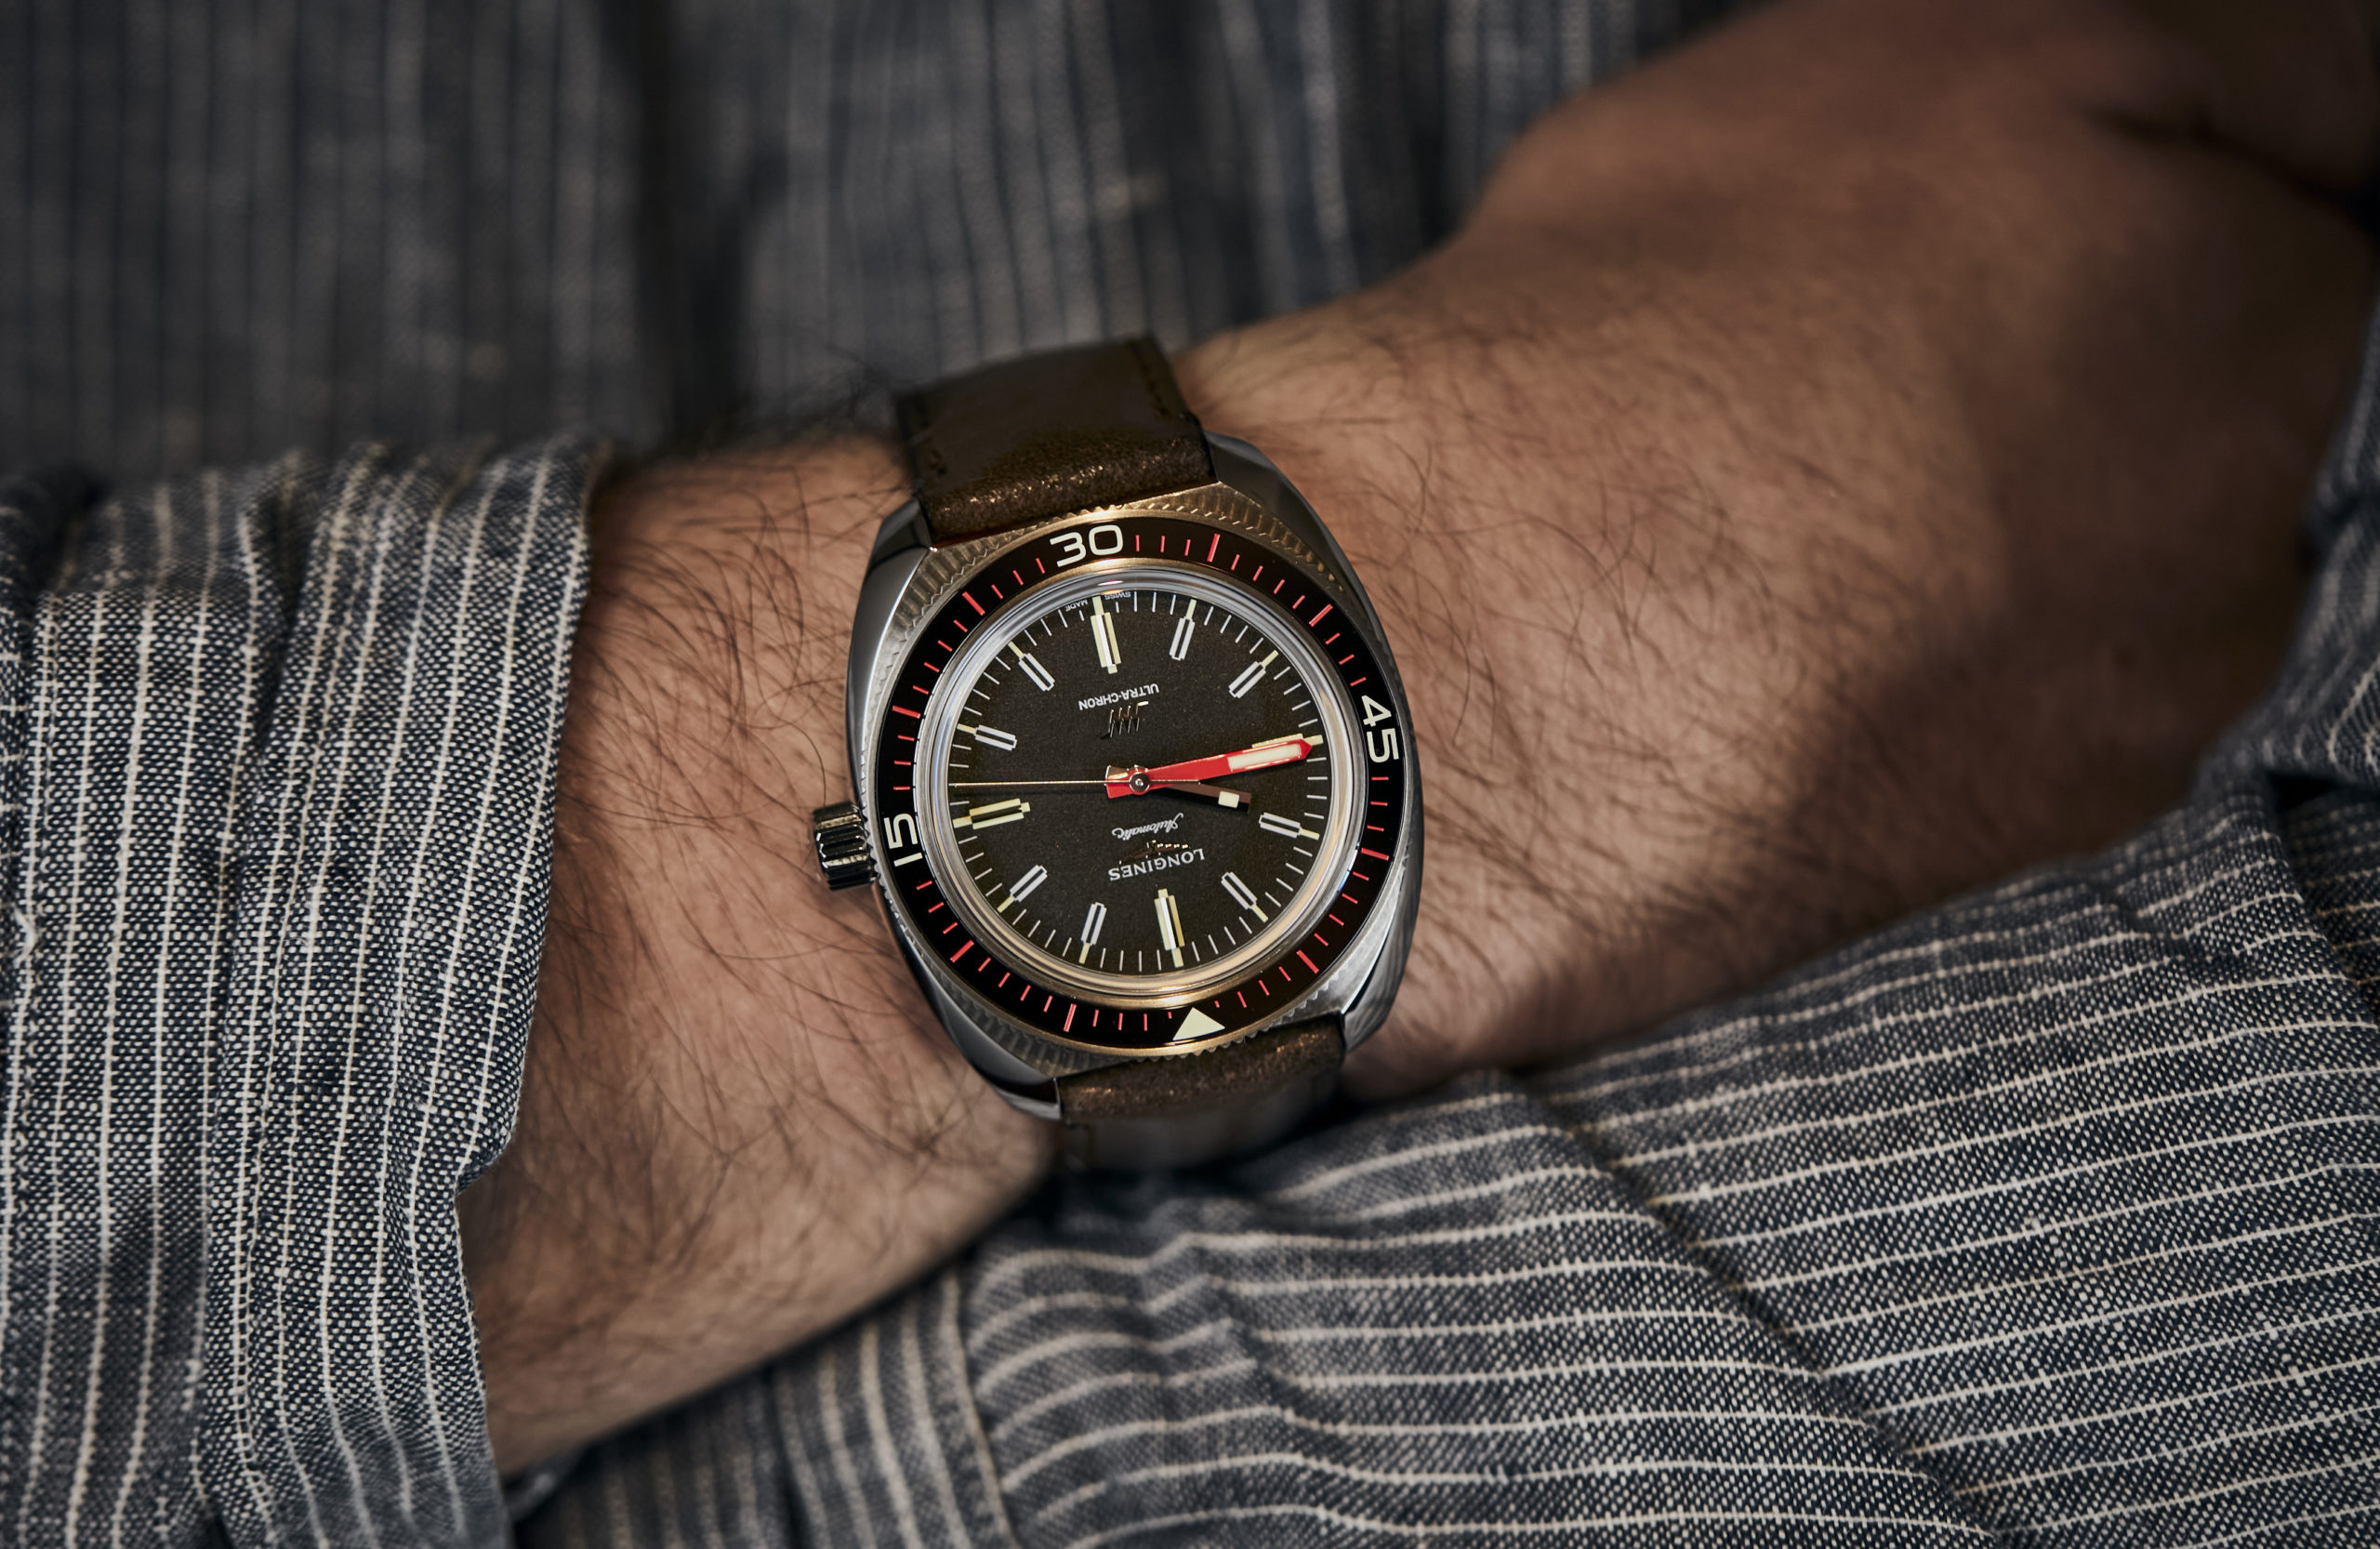 Longines Ultra-Chron Is A Vintage-Inspired Dive Watch With A Difference